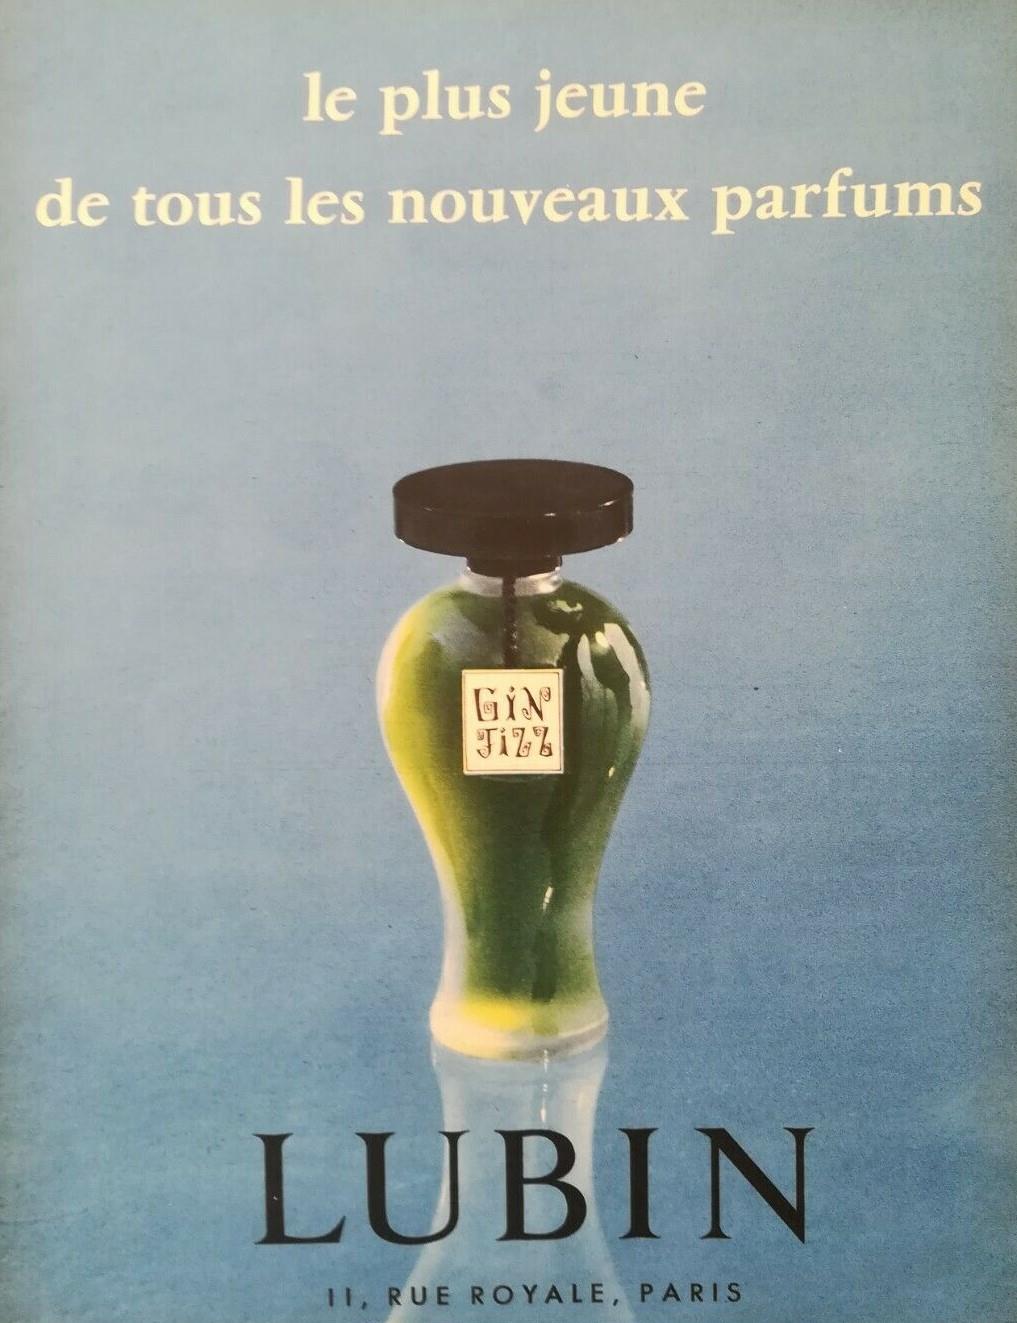 Confuso Administración Miserable Lubin Gin Fizz Parfum - Decanted Fragrances and Perfume Samples - The  Perfumed Court